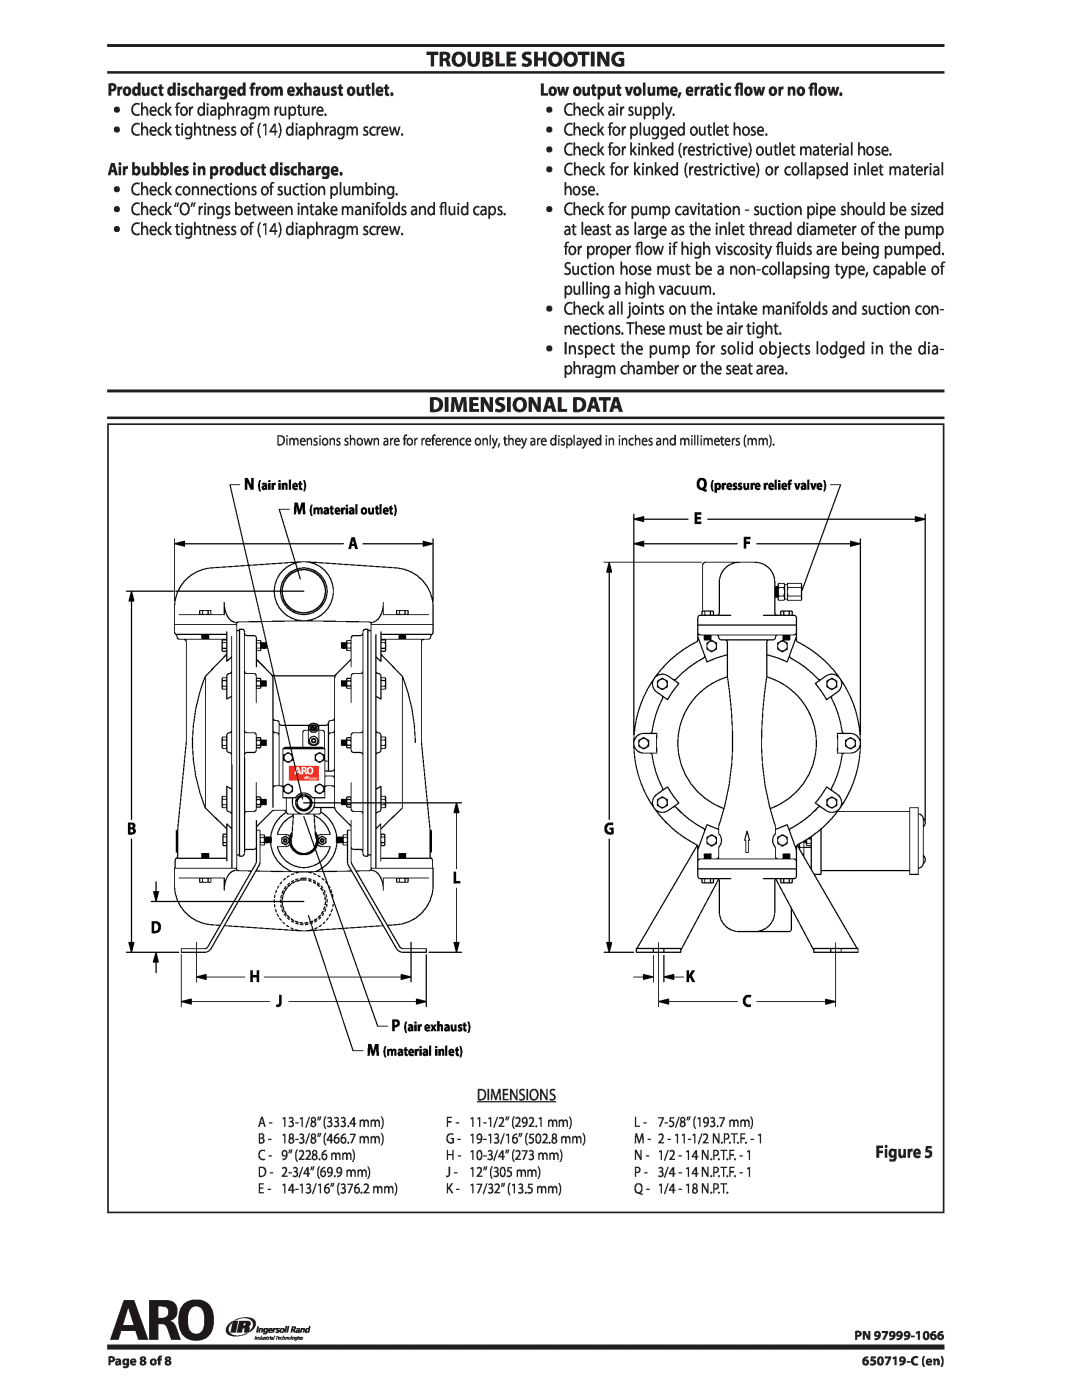 Ingersoll-Rand 650719-C manual Trouble Shooting, Dimensional Data, Product discharged from exhaust outlet 